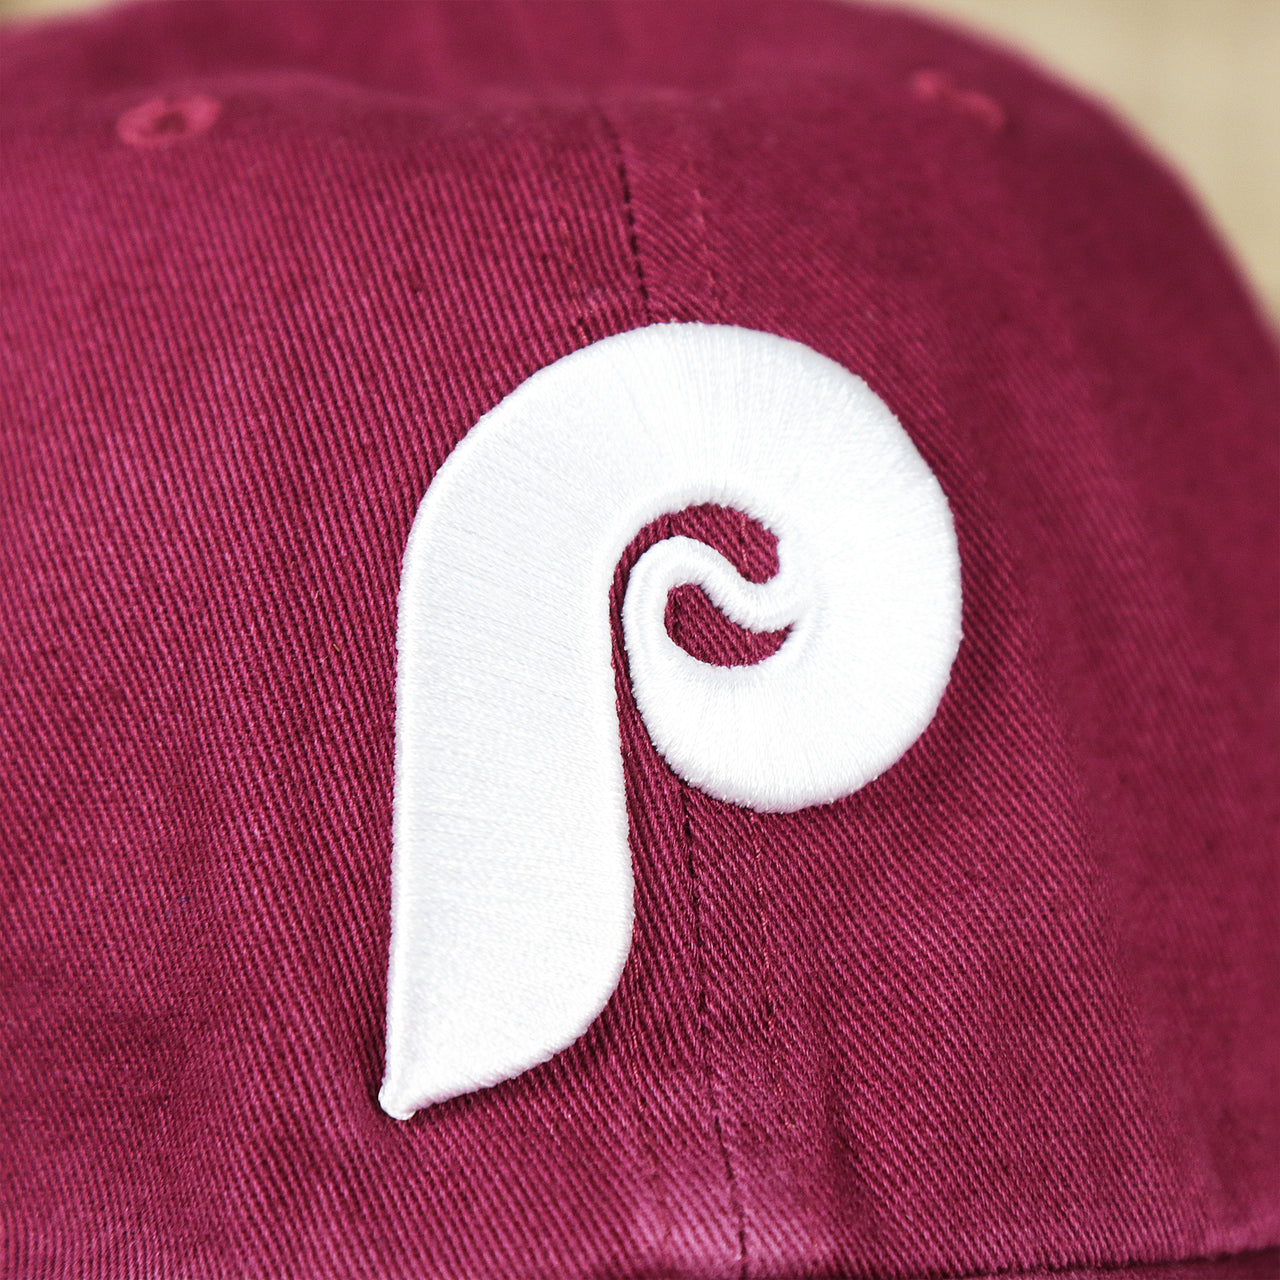 The Phillies Logo on the Cooperstown Philadelphia Phillies White Cooperstown Logo Dad Hat | Cardinal Dad Hat